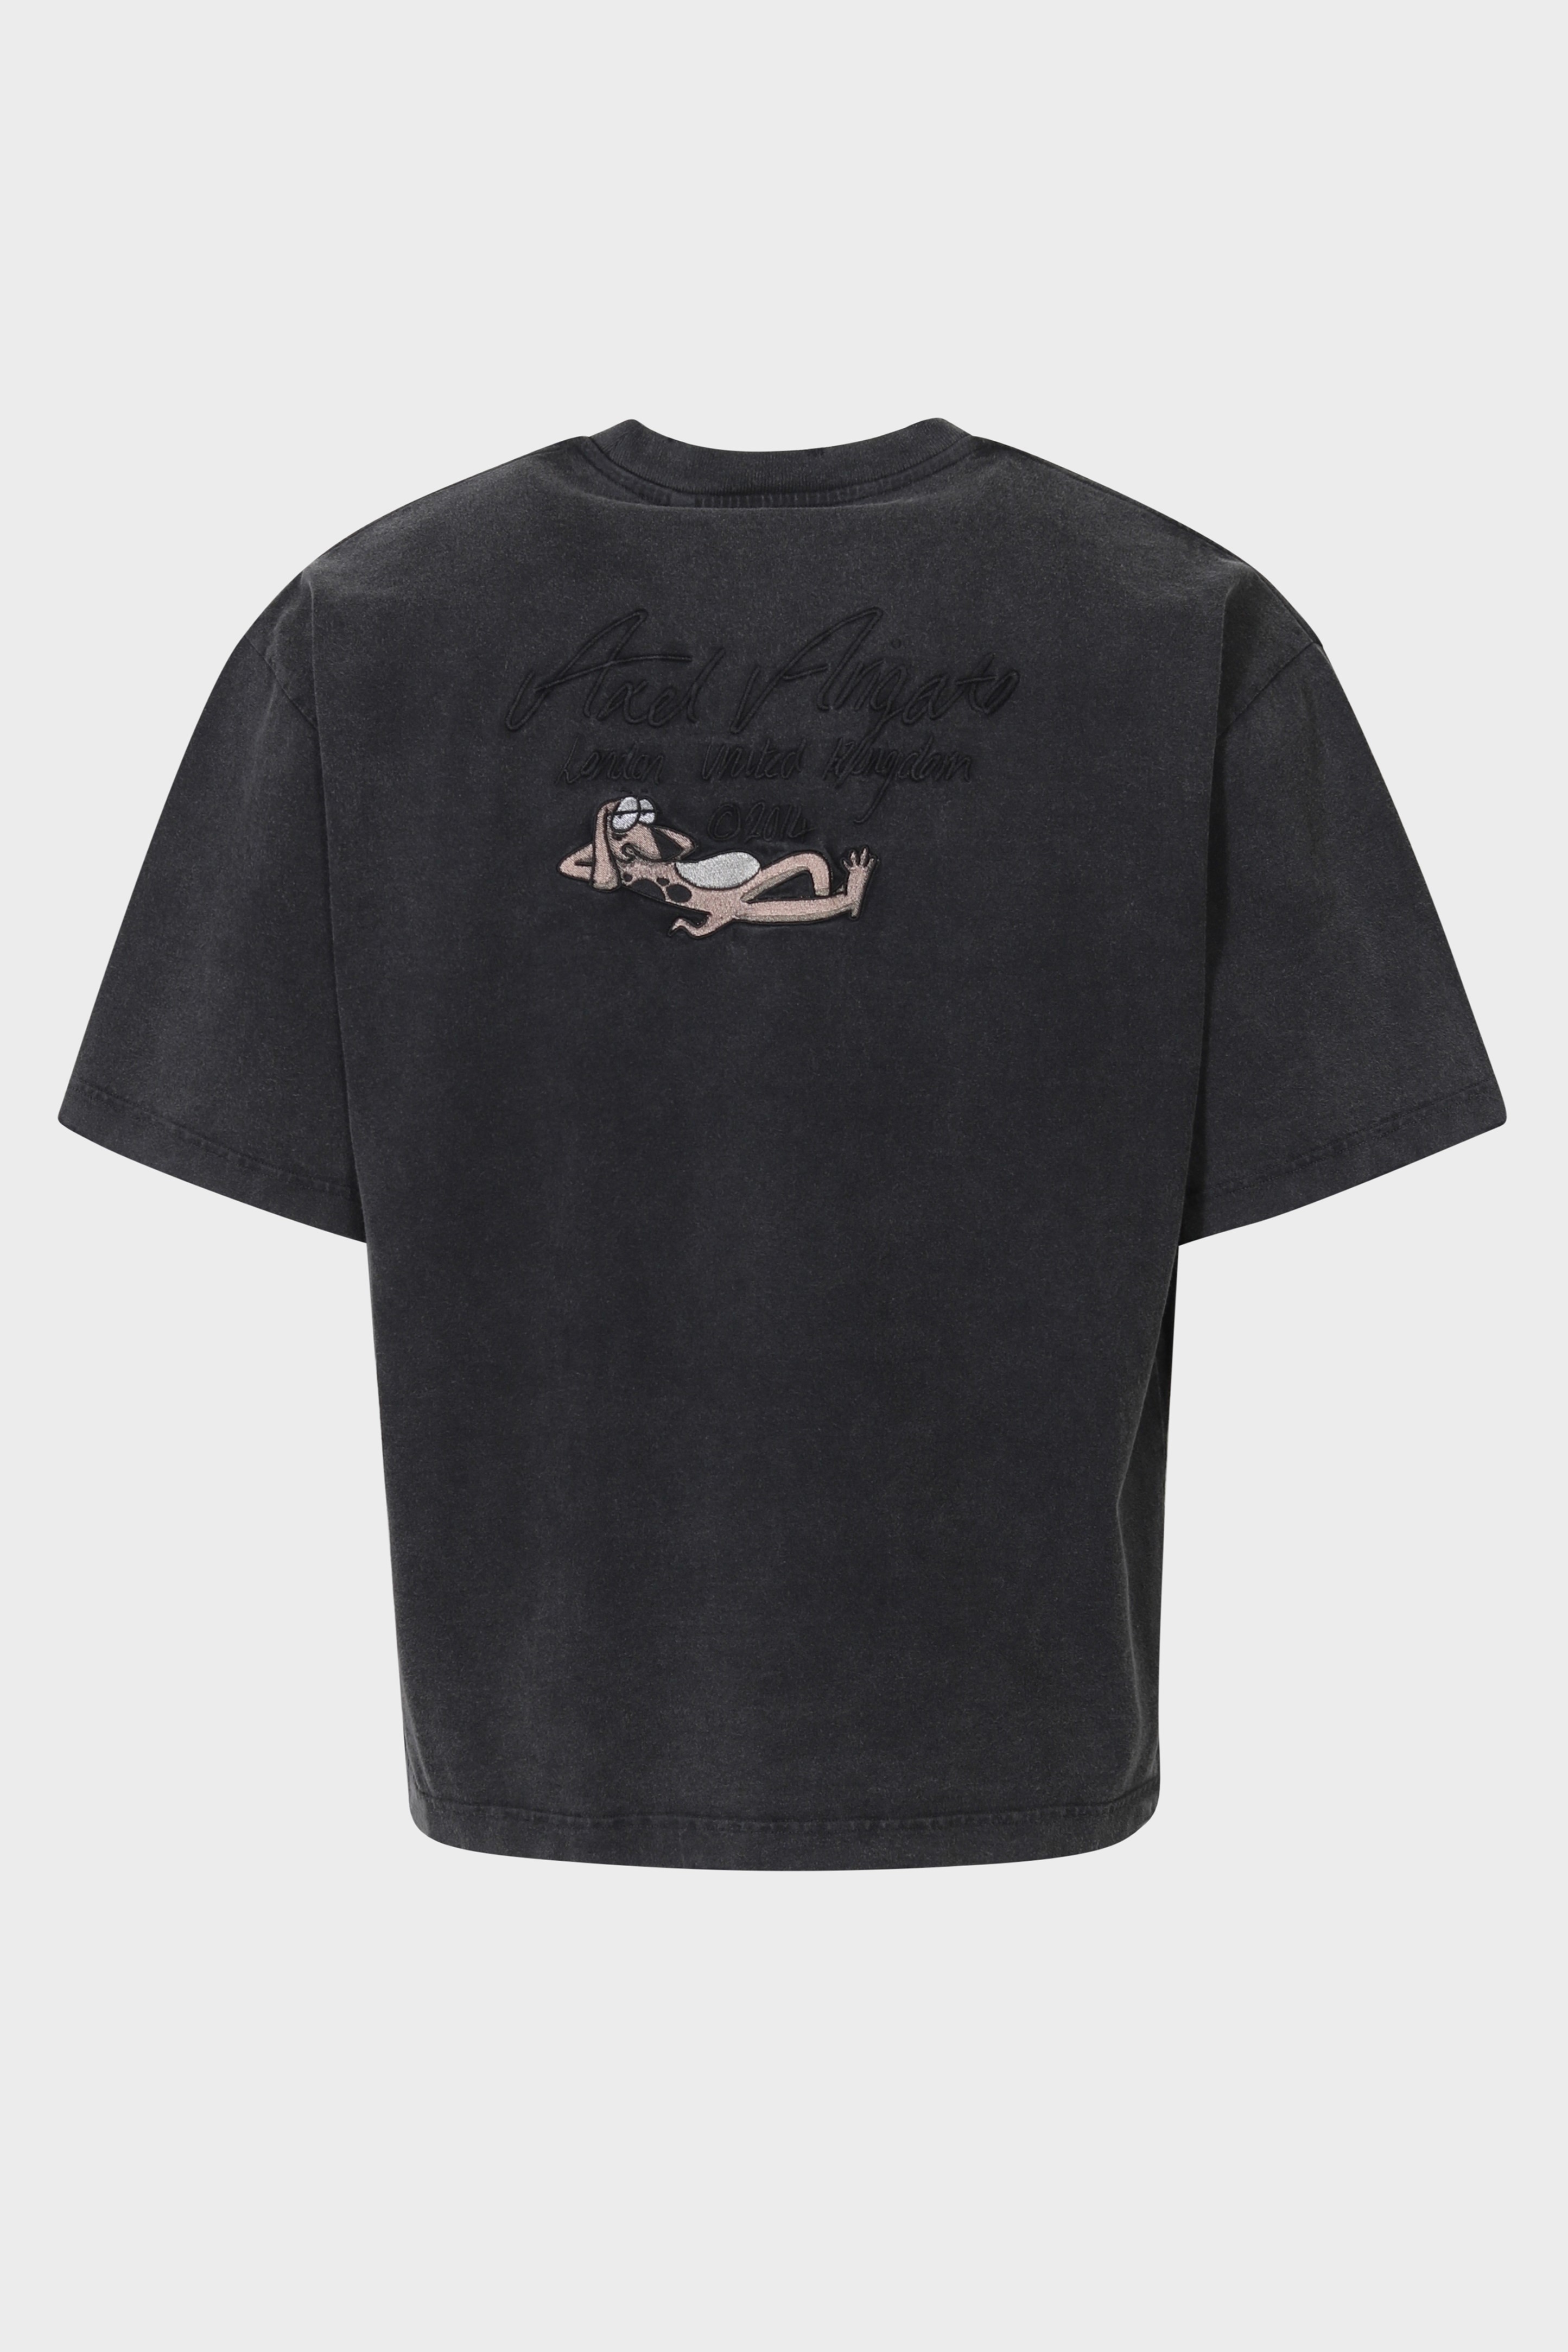 AXEL ARIGATO Wes Distrezzed T-Shirt in Washed Black M